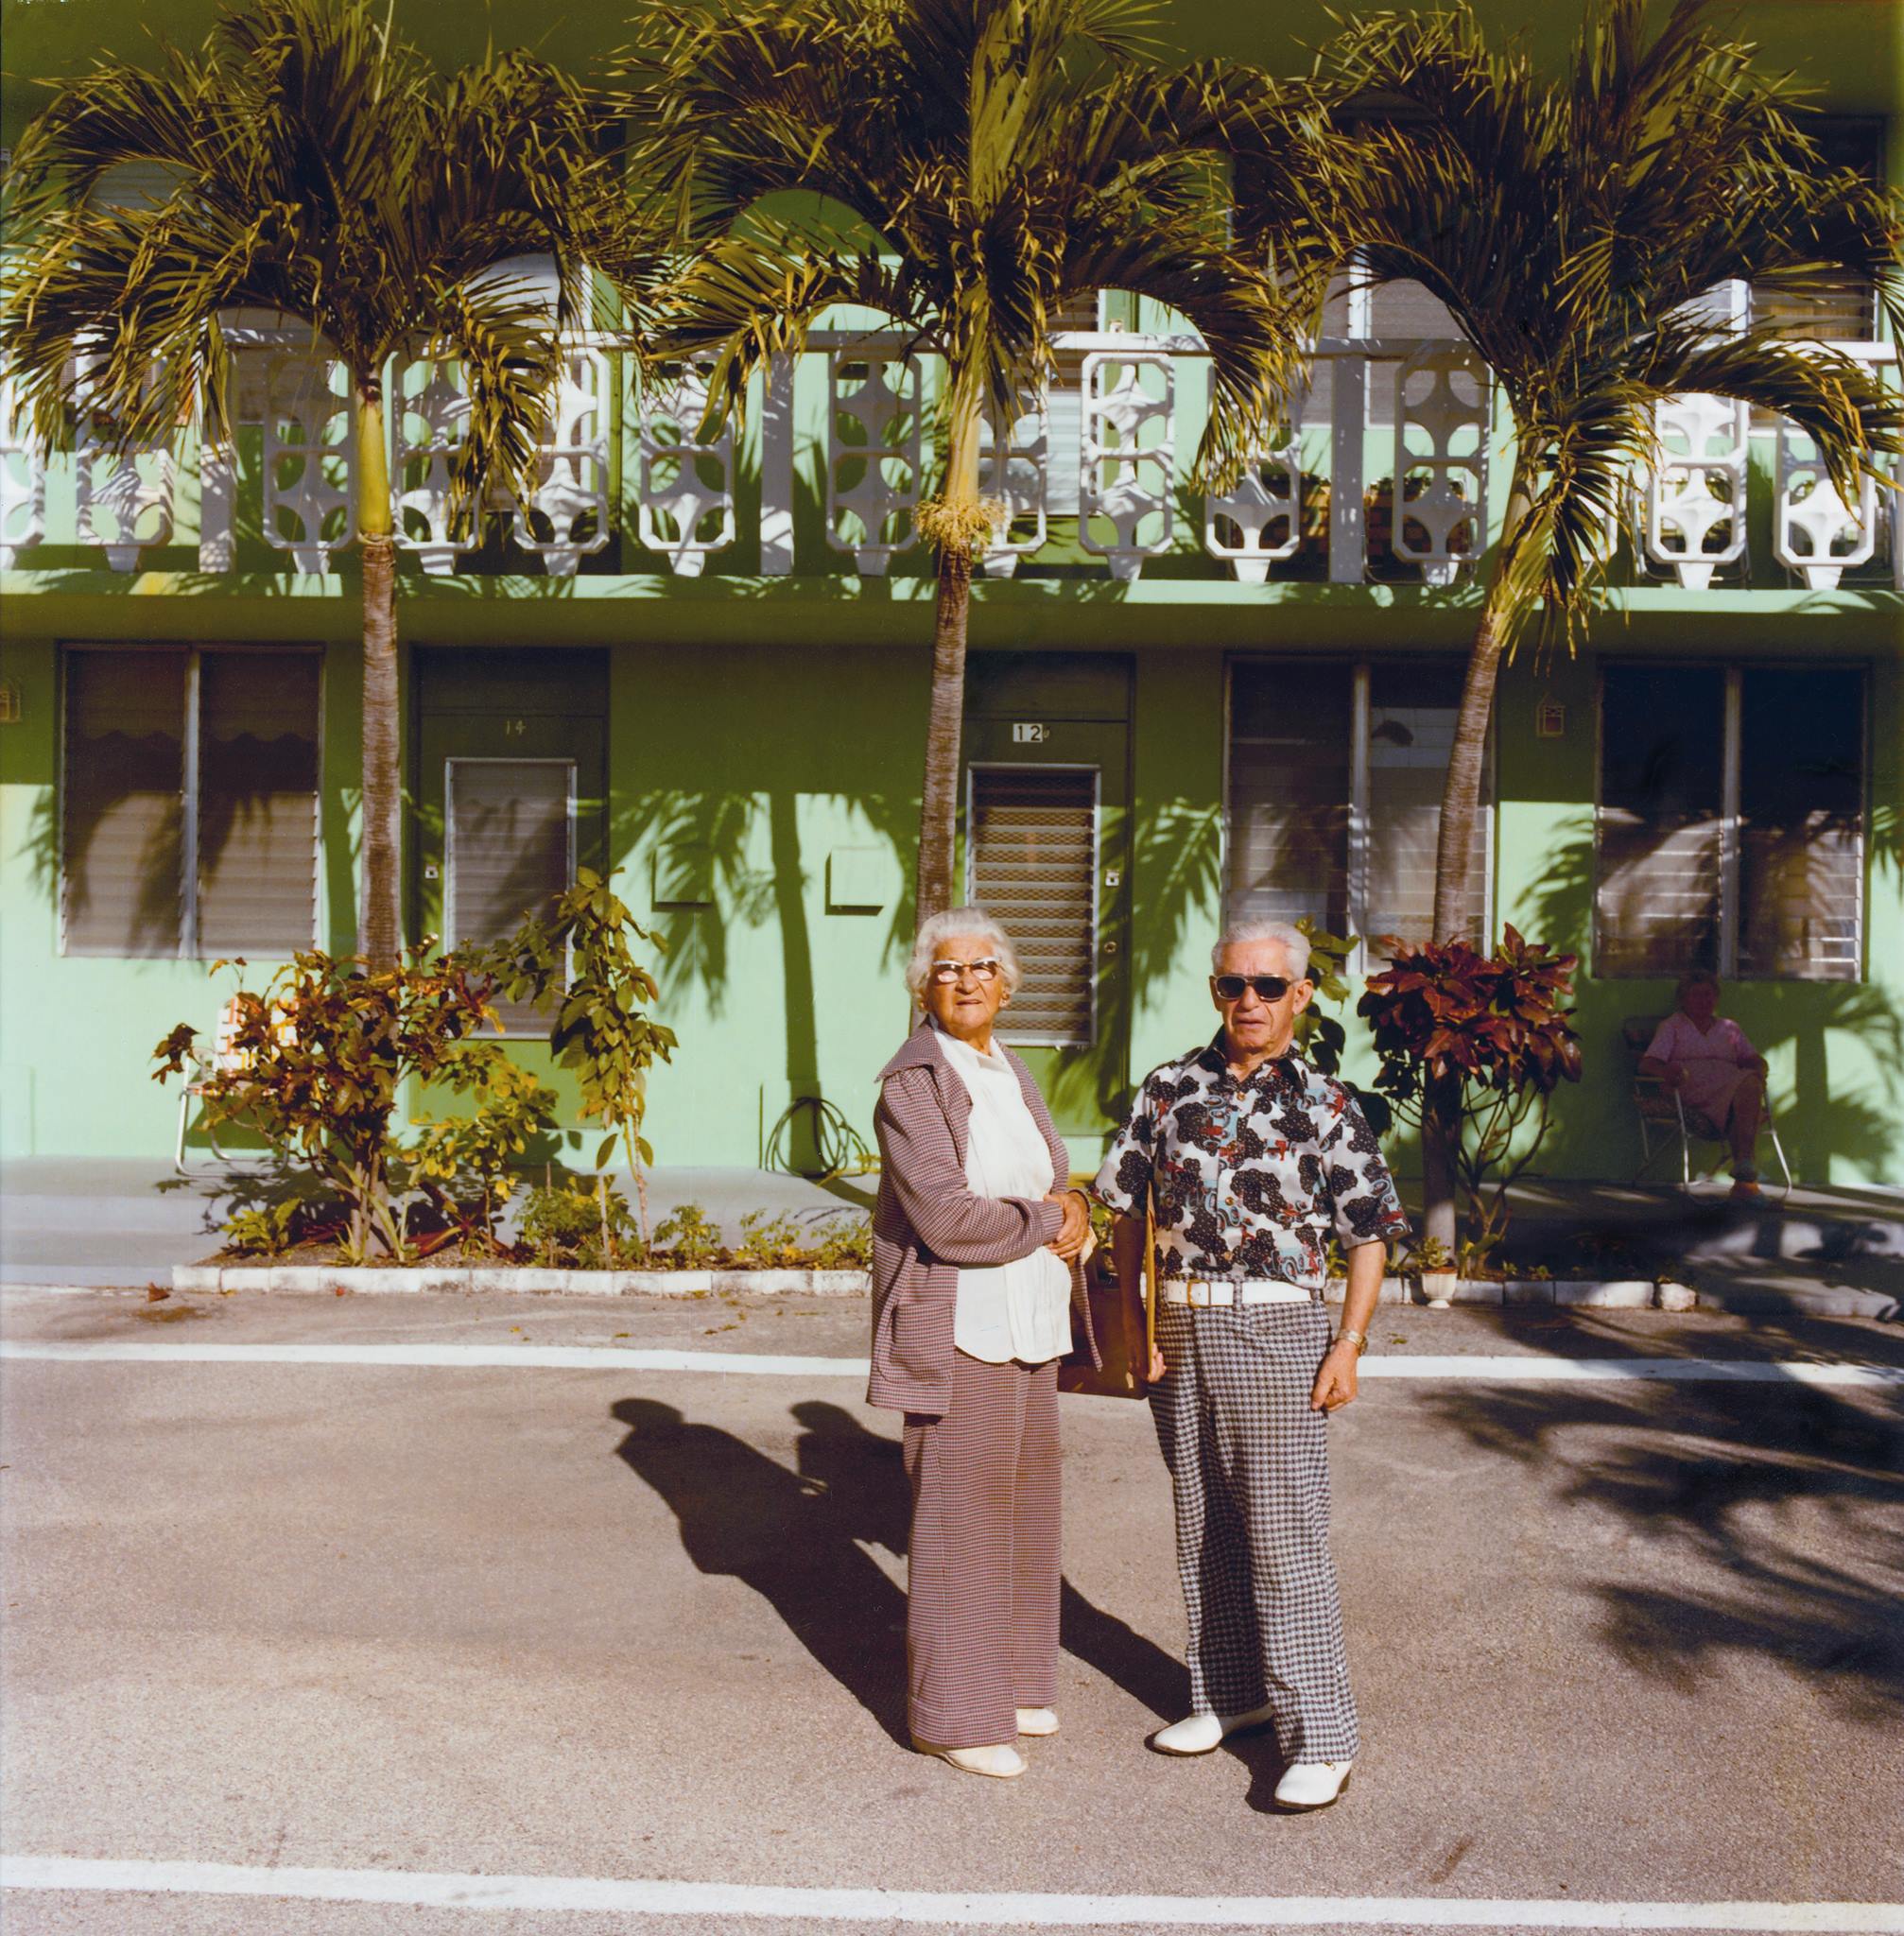 In the 1970s, Andy Sweet Photographed the Kitschy Vibrance of a ‘Fading’ Miami Beach